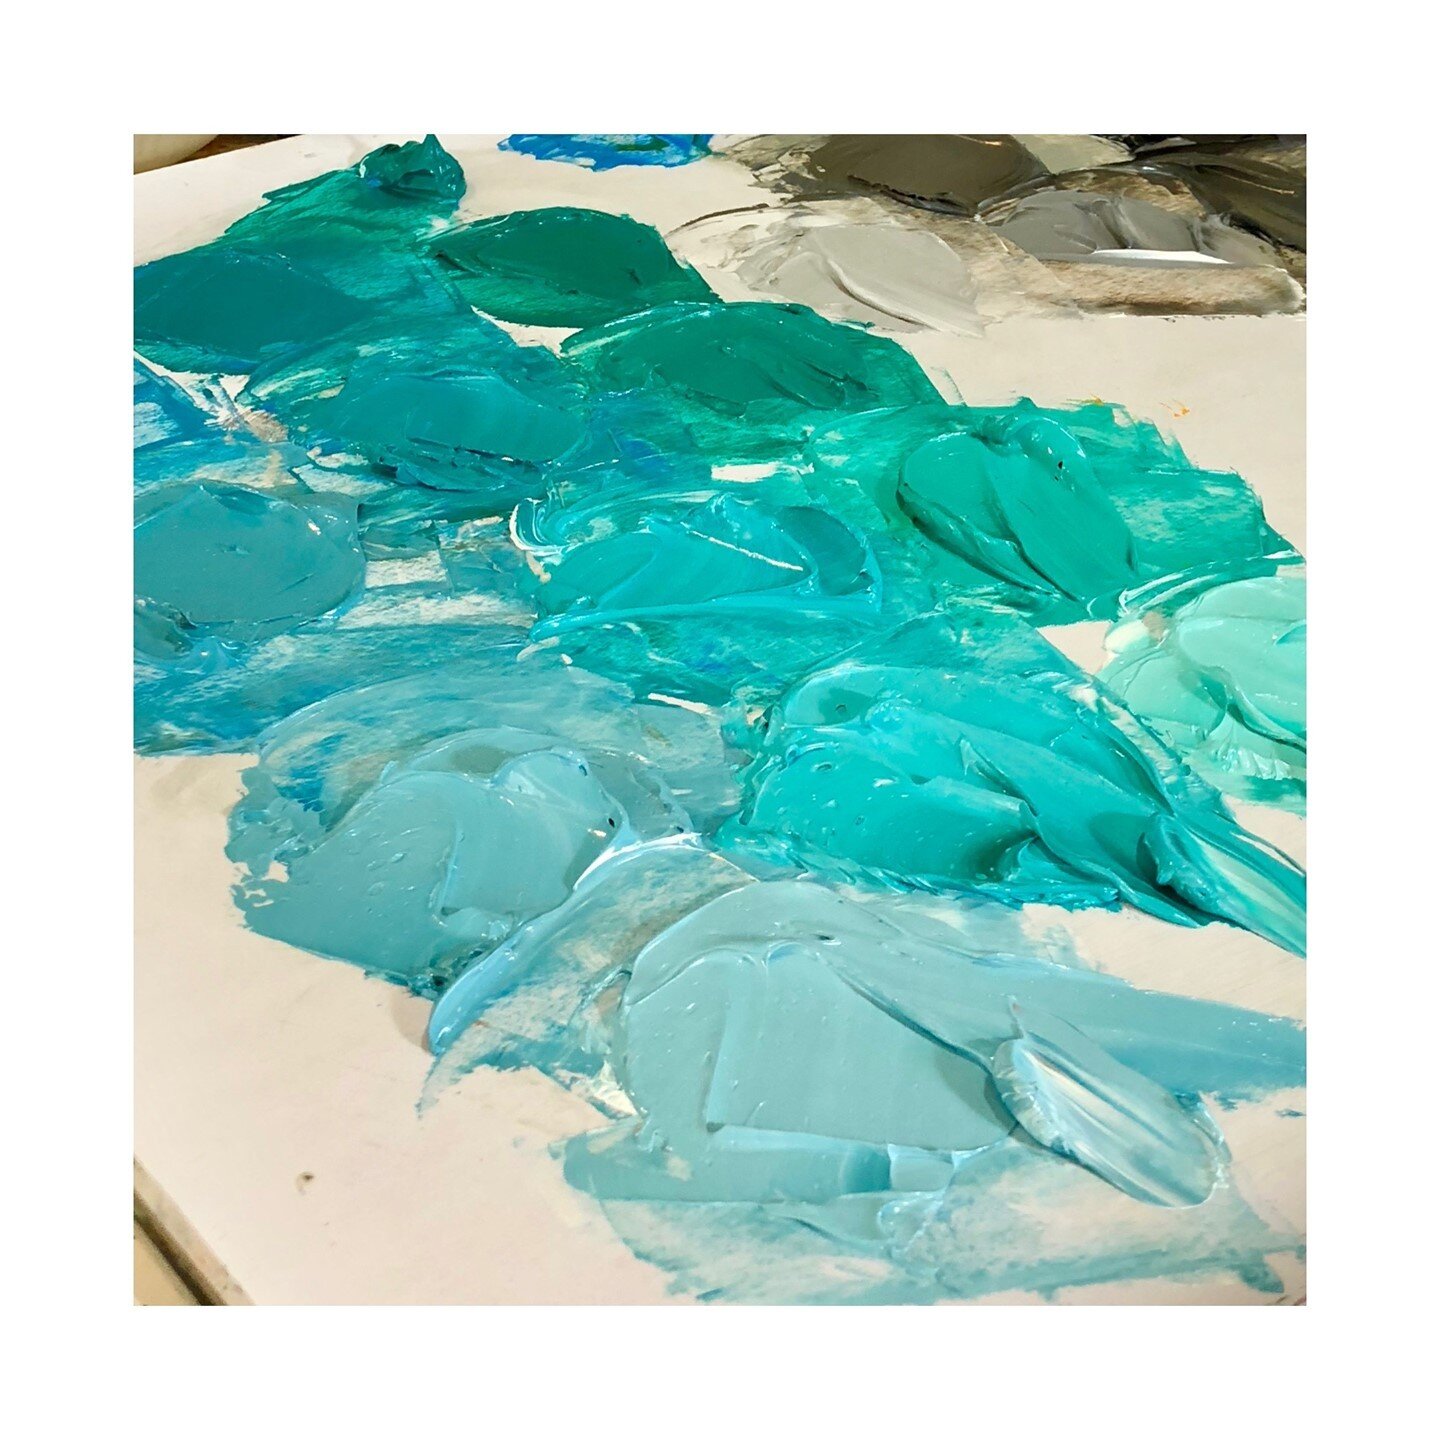 Happy Saturday! ⁠
Have an Amazing Day!⁠
⁠
I cannot get enough of this Cobalt Teal! ⁠
What's your favorite Blue? ⁠
#colorismyjam ⁠
⁠